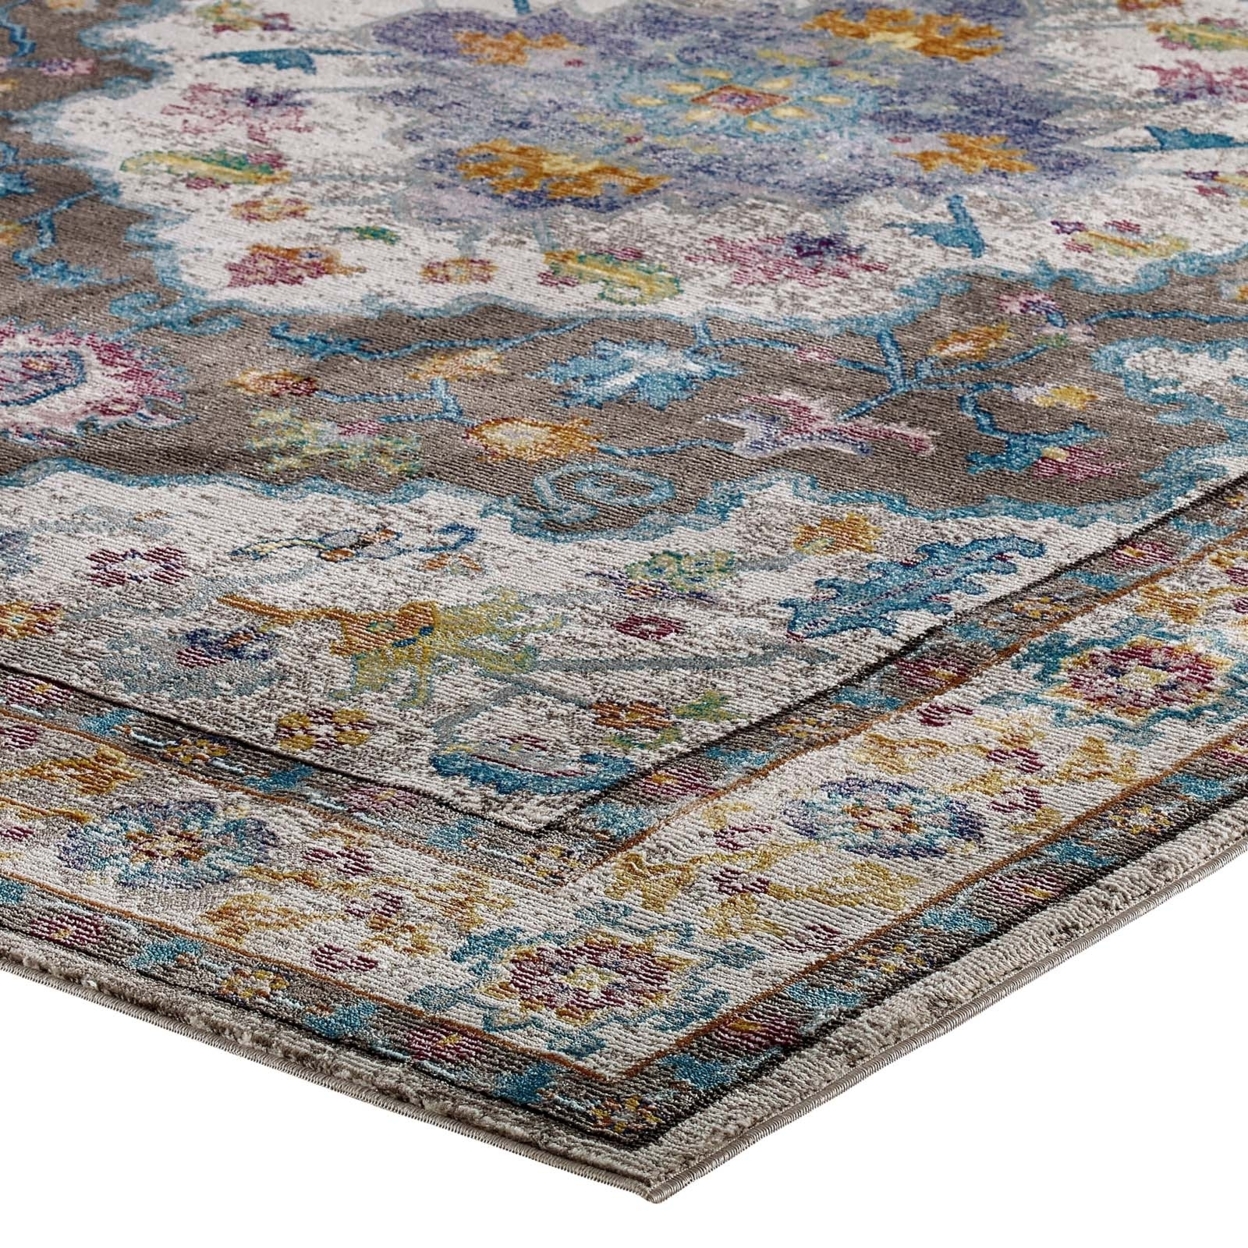 Success Anisah Distressed Floral Persian Medallion 5x8 Area Rug, Gray, Ivory, Yellow, Orange